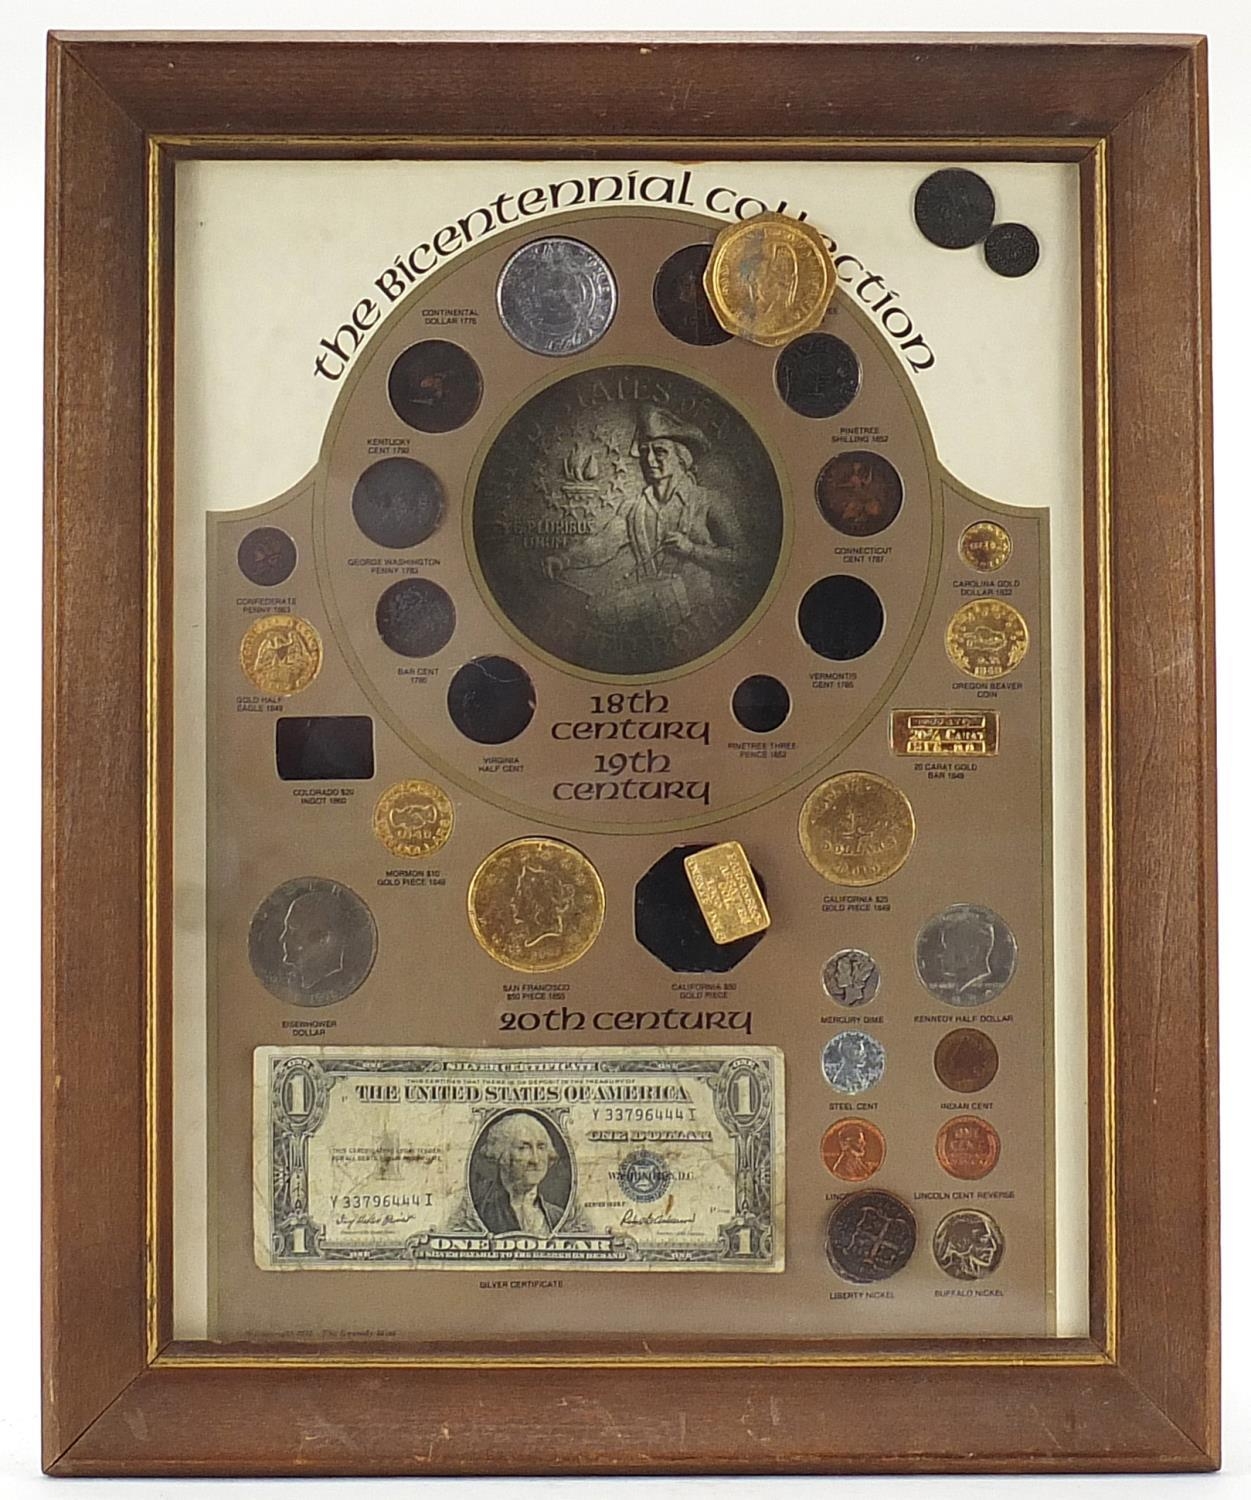 20th century Bicentennial Coin Collection by The Kennedy Mint, framed and glazed, 35cm x 27cm